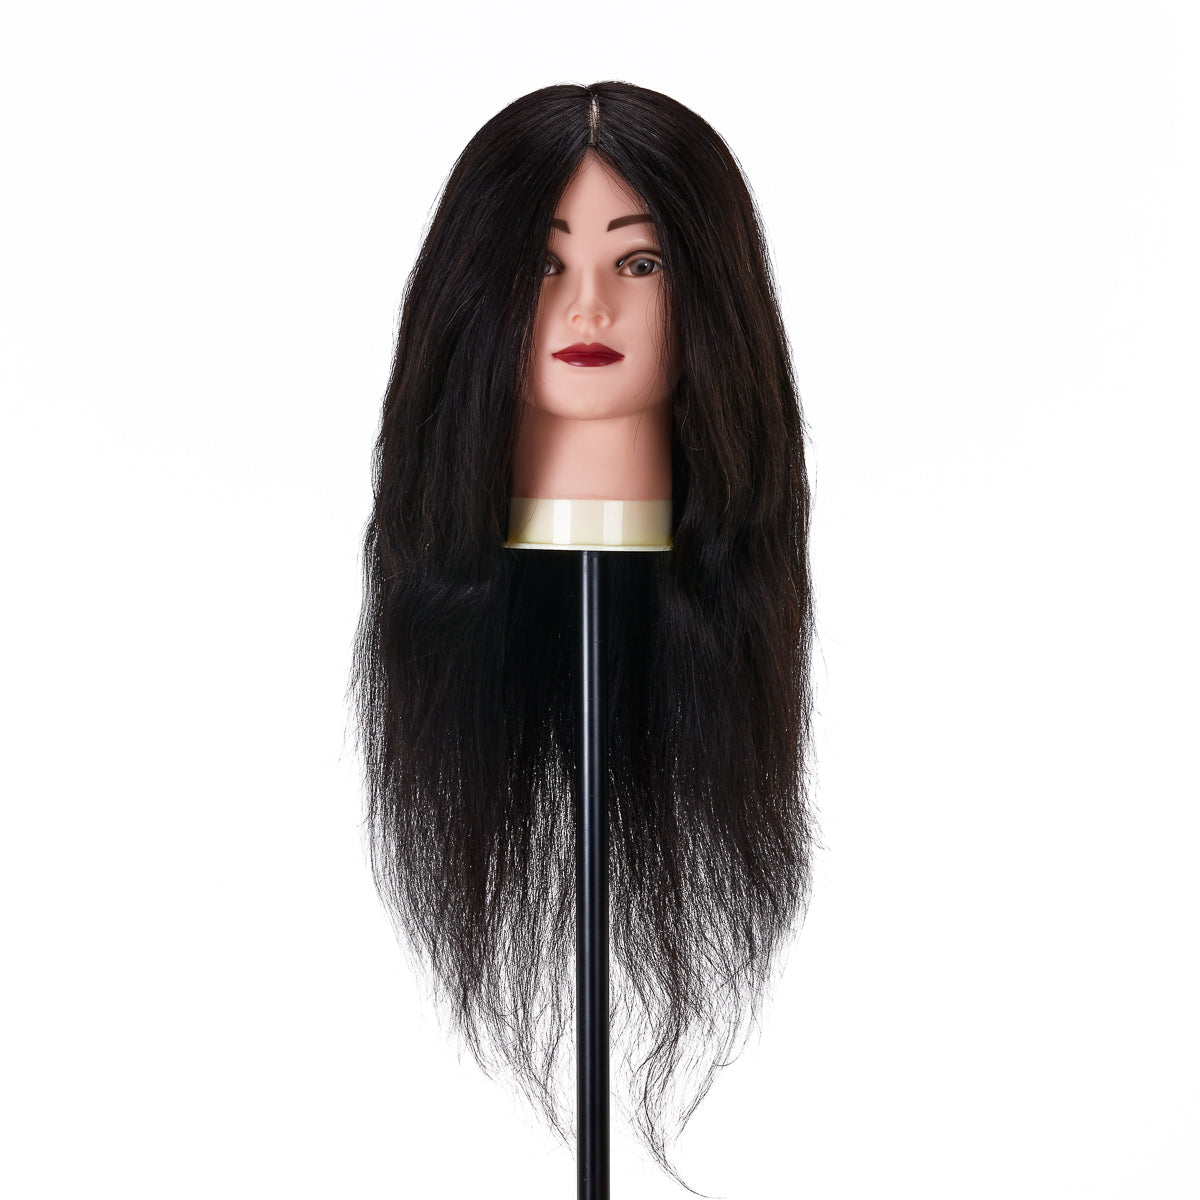 Gabbiano WZ1 Hairdressing Training Head with Real Hair, Color 1#, Length 20" 